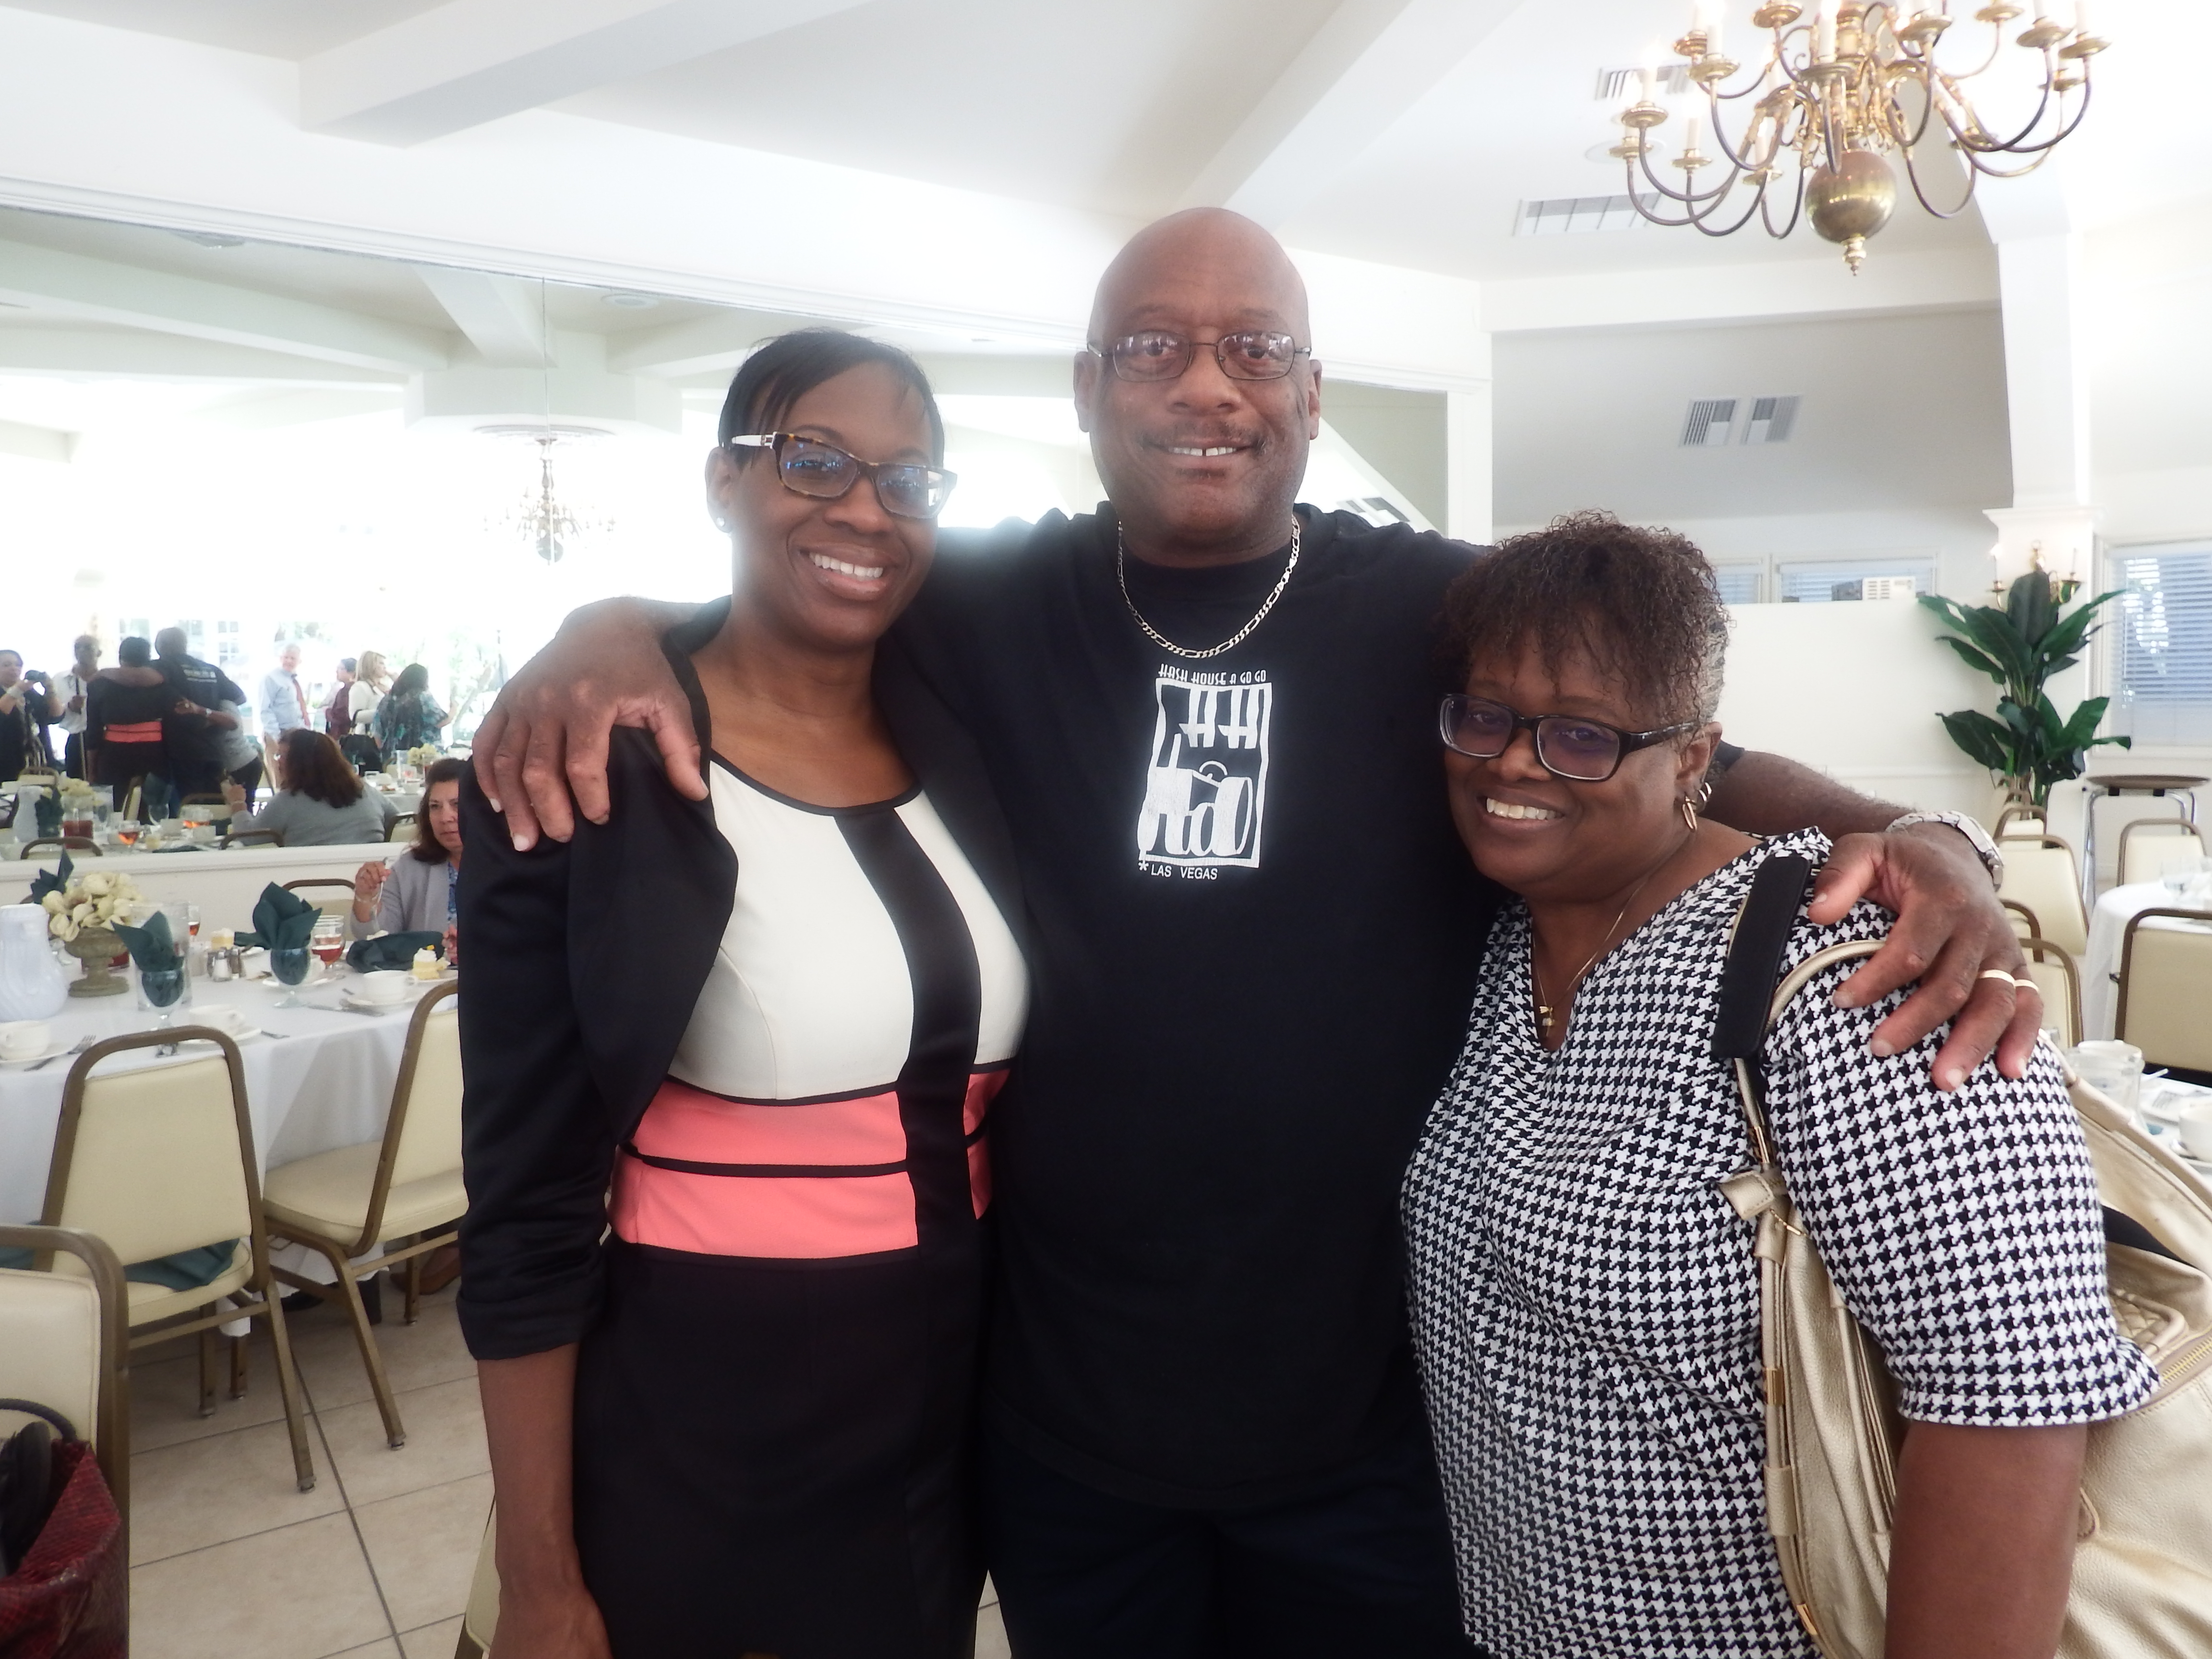 Senator Nina Turner, me and my wife Marilyn at San Diego Fair Housing Conference, February 2015